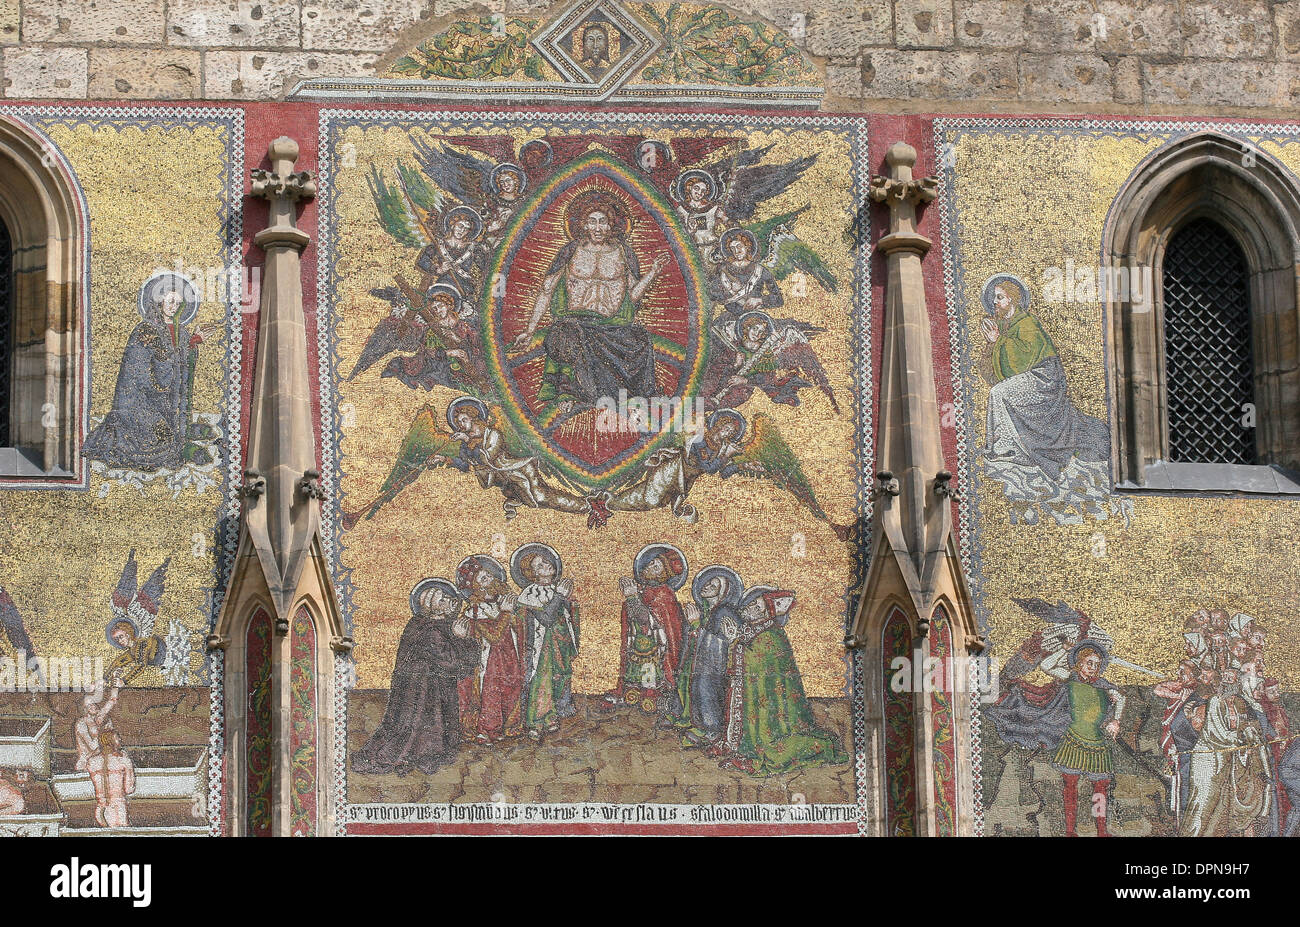 Czech Republic. Prague. St. Vitus Cathedral. The Golden Gate. Mosaic of the Last Judgement (1372), by Niccoletto Semitecolo. Stock Photo